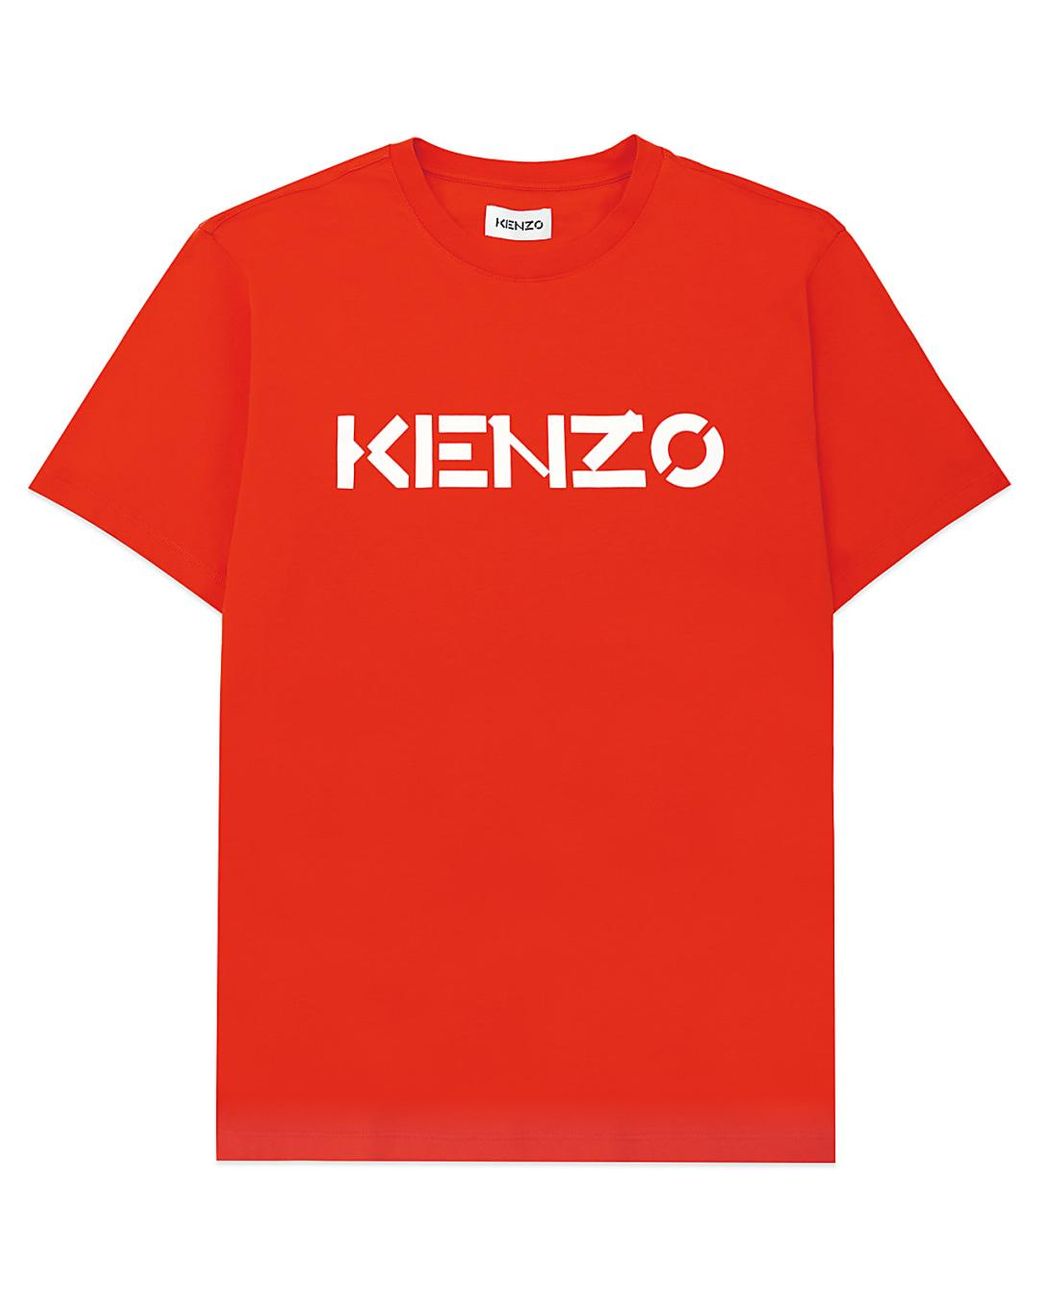 KENZO Cotton Logo T-shirt in Red for Men - Lyst